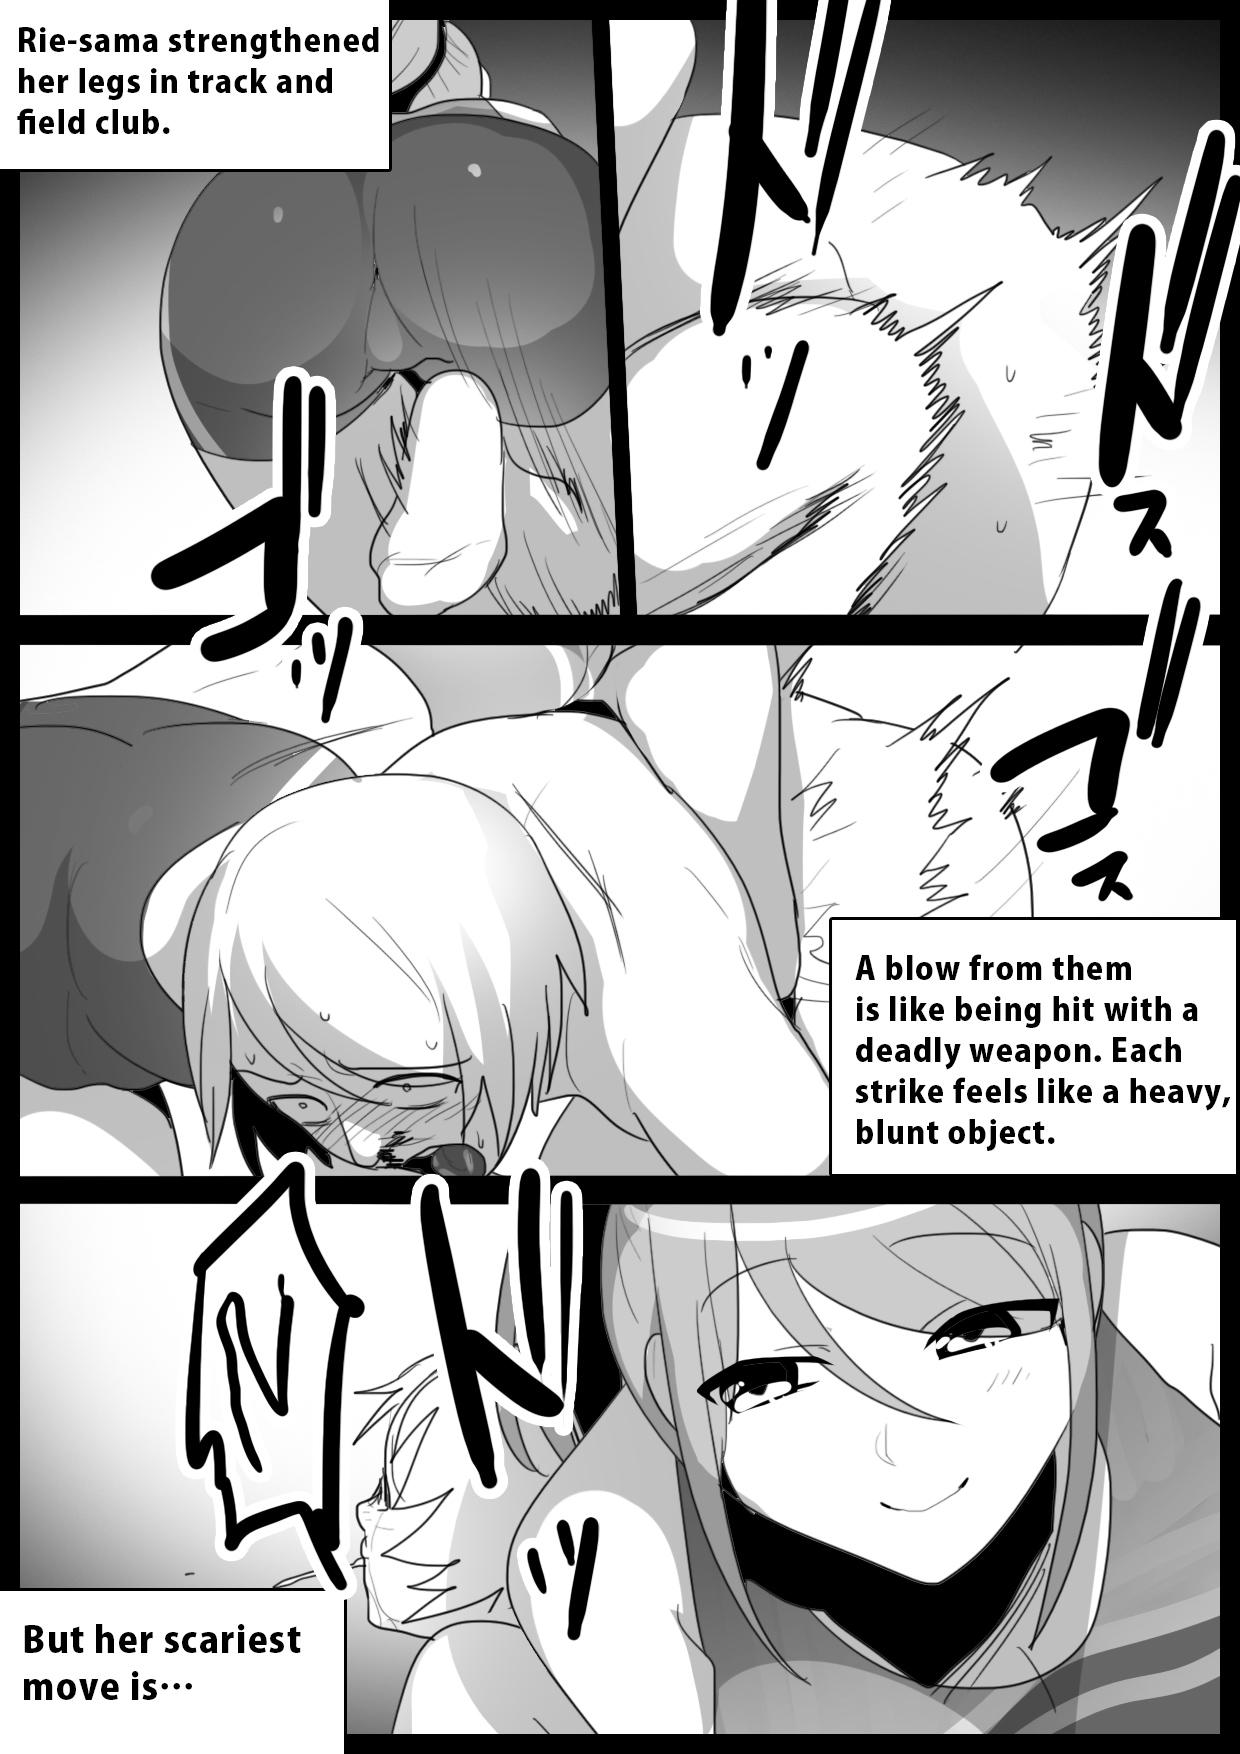 Kashima Spin-Off of Girls Beat by Rie - Original Cumswallow - Page 6